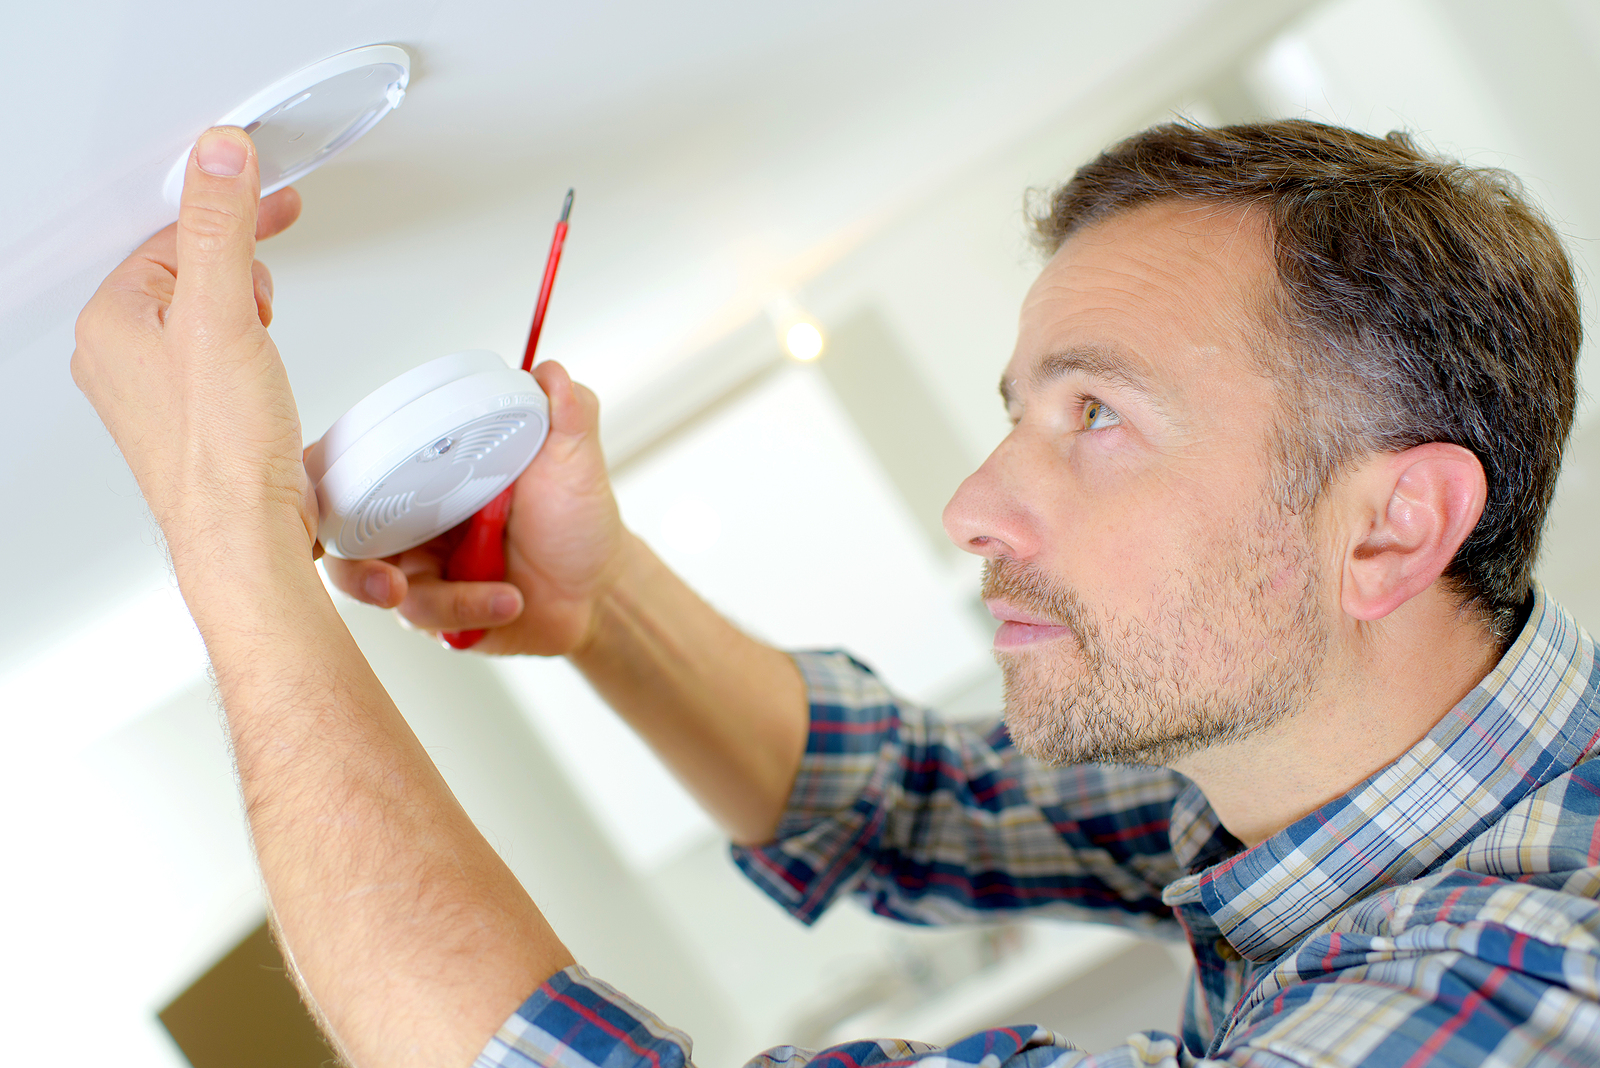 installing fire alarms - Installation of a smoke alarm